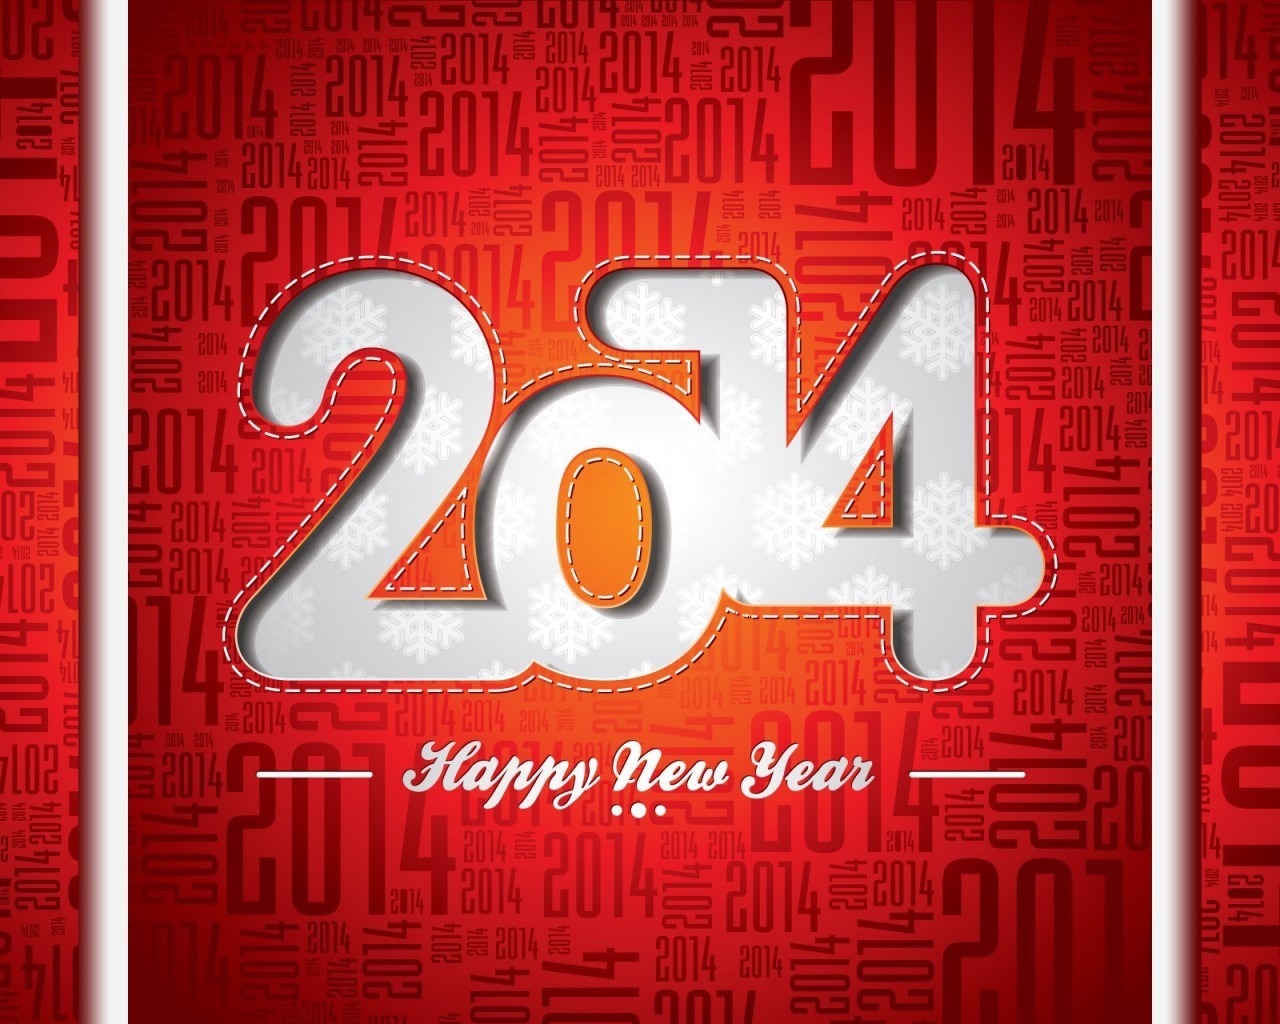 Happy New Year 2014 for 1280 x 1024 resolution